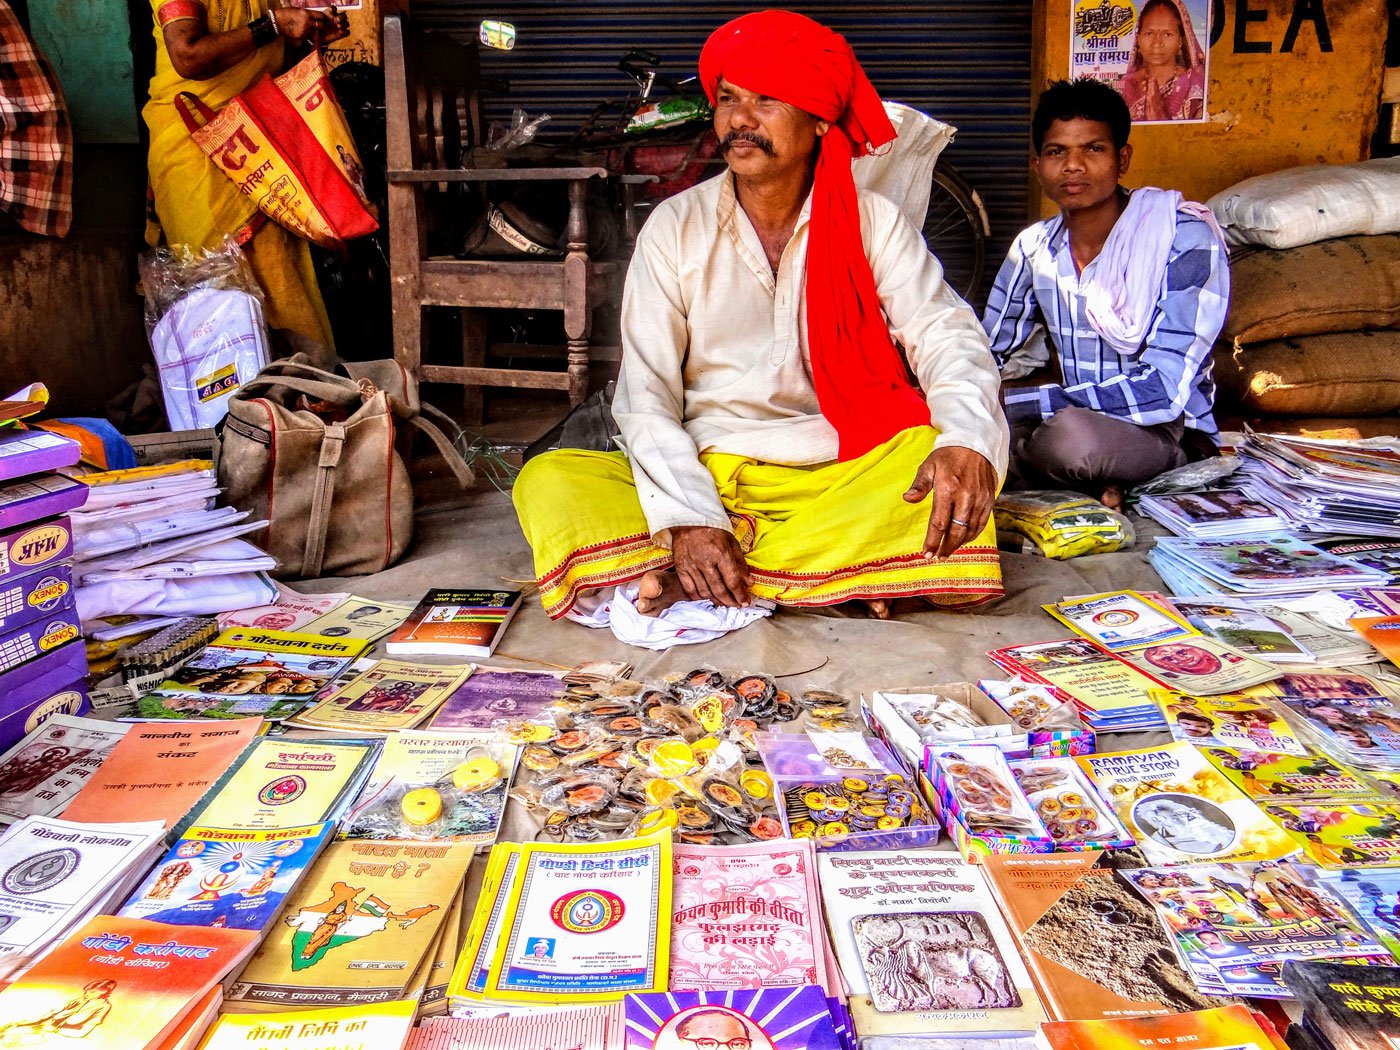 Rampyari Kawachi cannot read any of the books he sells. But the book vendor from Chhattisgarh's Gond community is on a mission to promote reading and learning in Adivasi communities